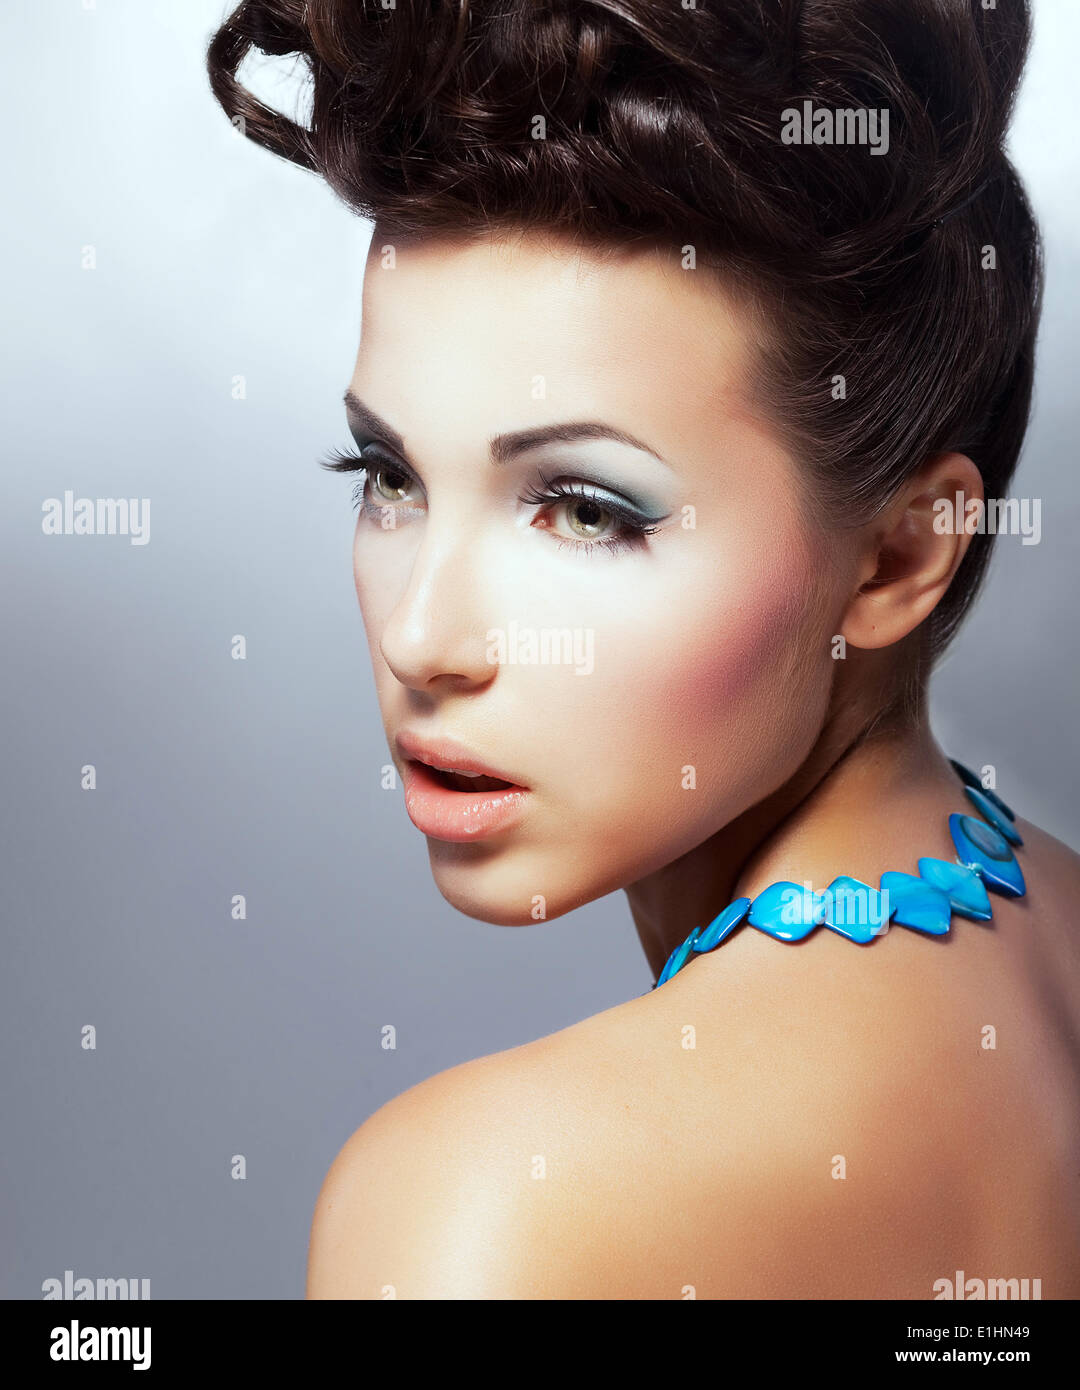 Complexion. Profile of Fascinating Delightful Brunette with Natural Makeup. Refinement Stock Photo